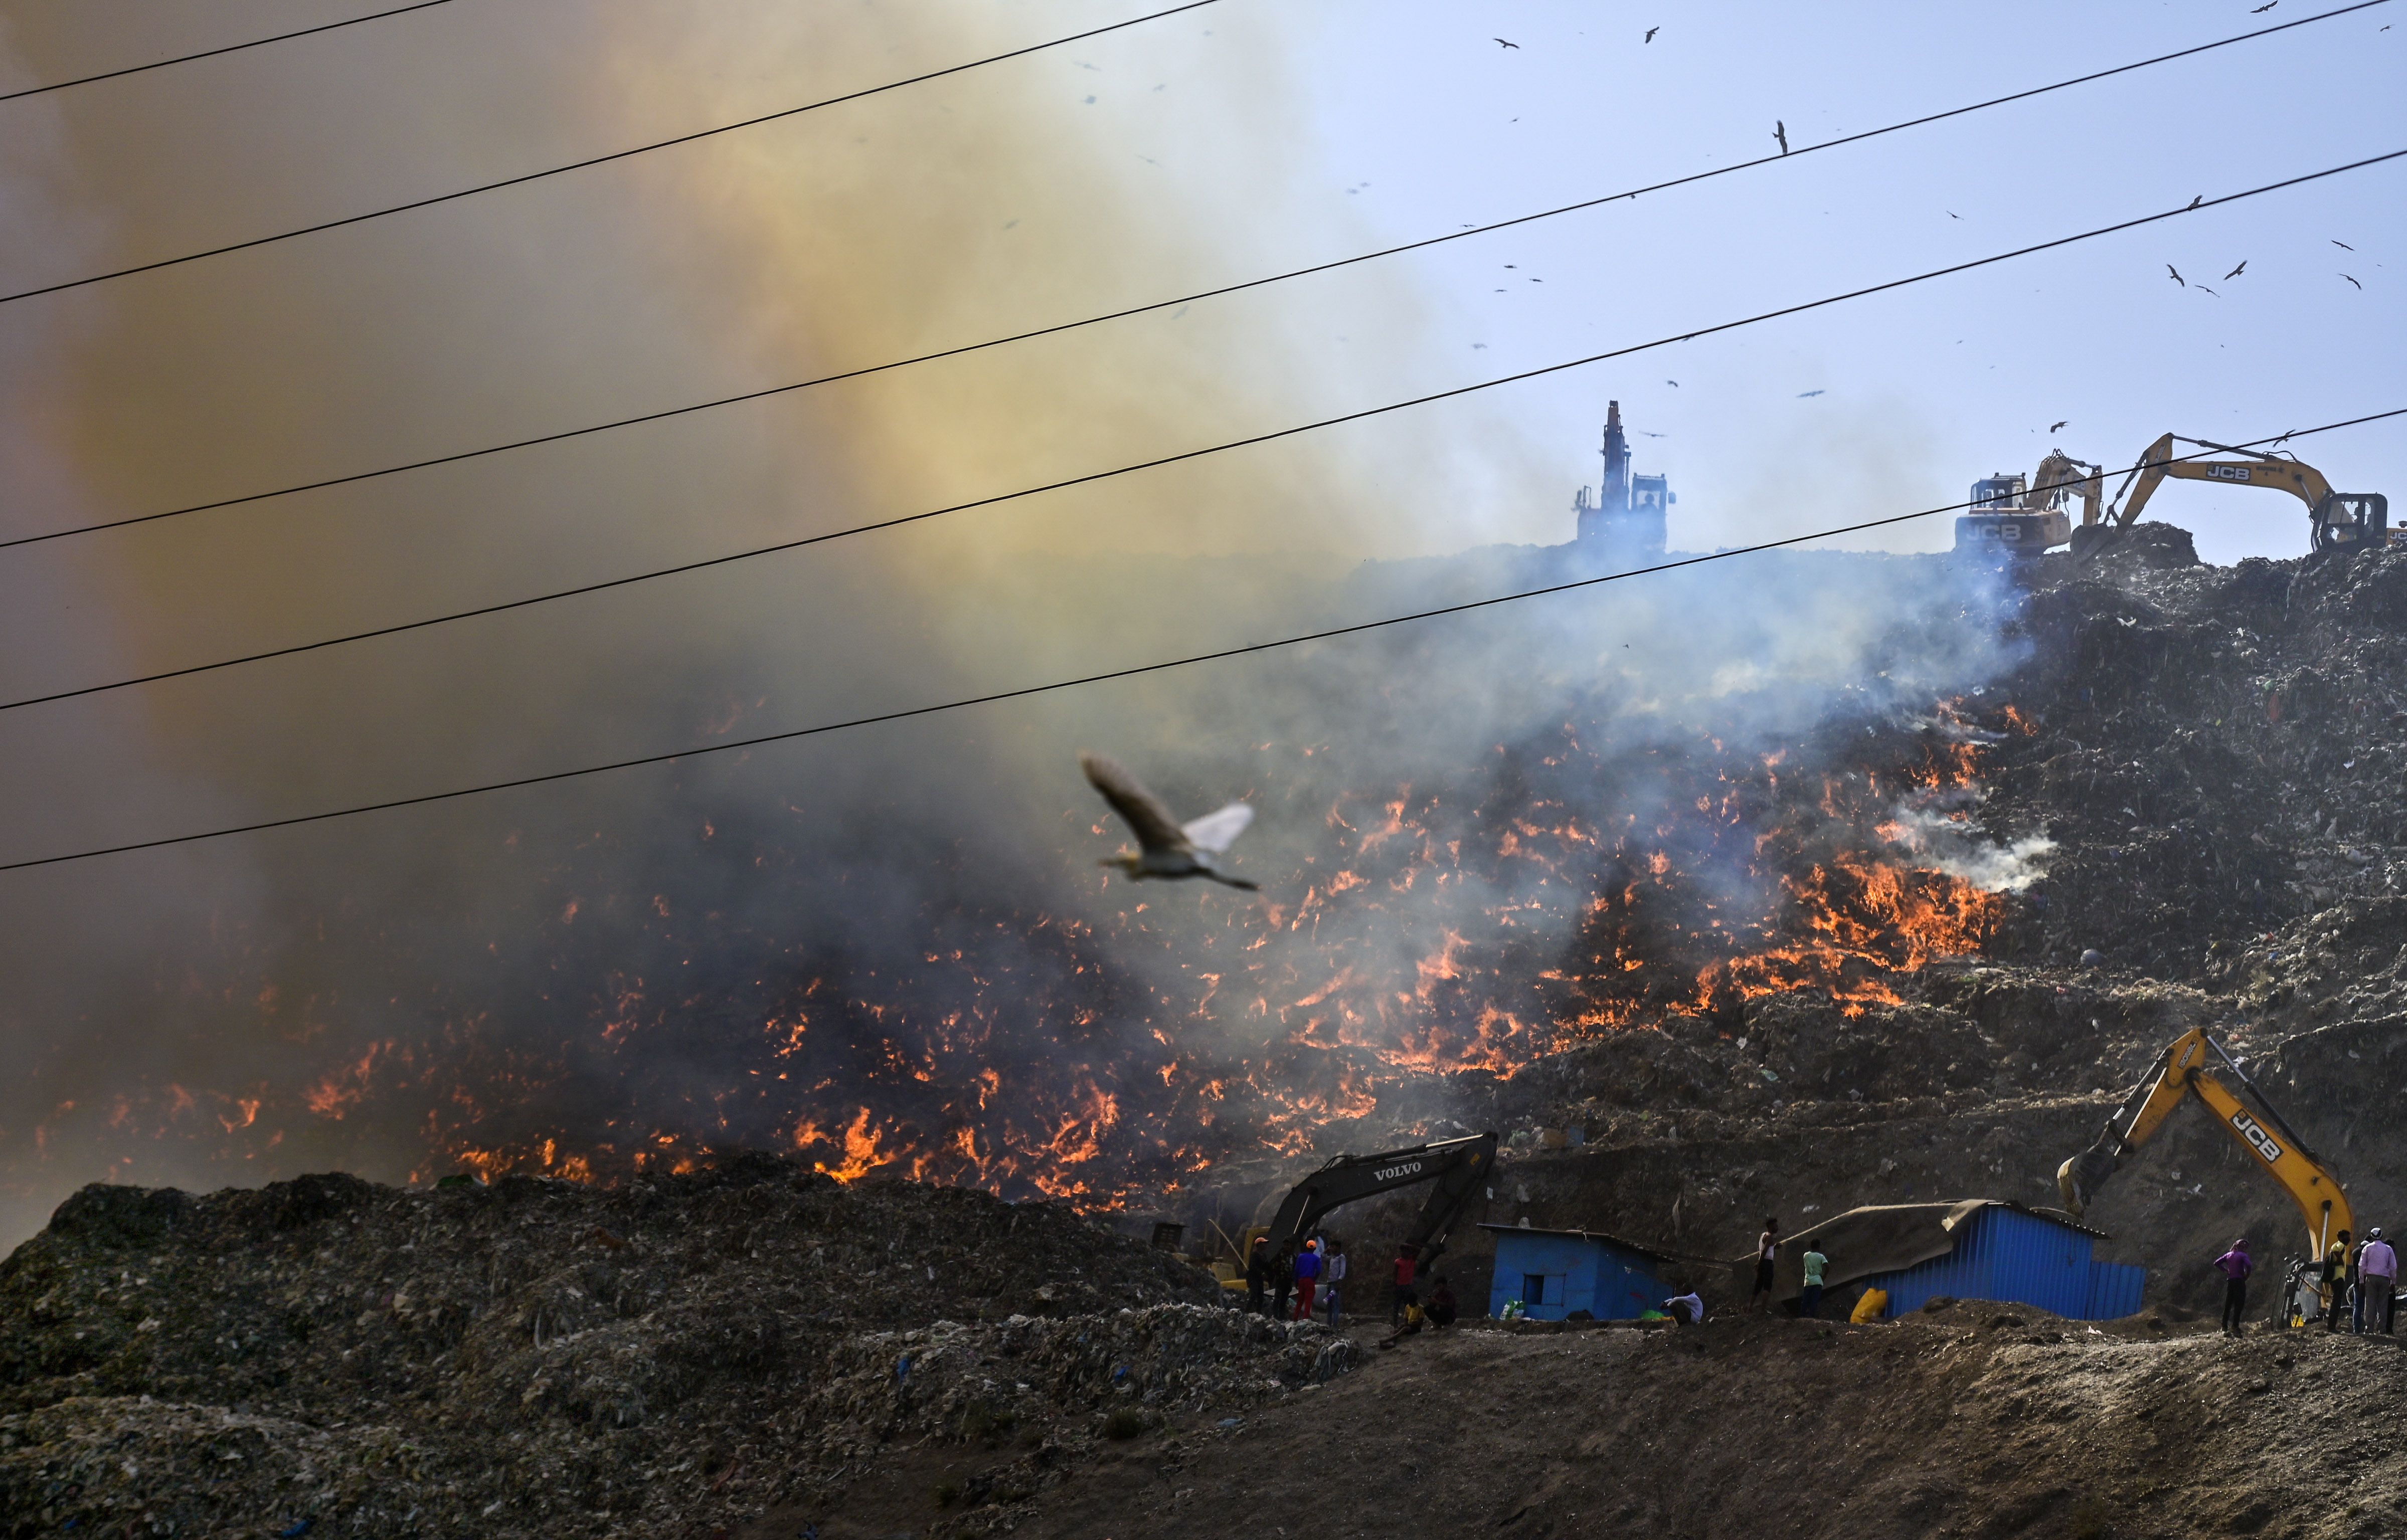 Flames and smoke rise from a fire at Ghazipur Landfill, in New Delhi, Monday, March 28, 2022. (PTI Photo)